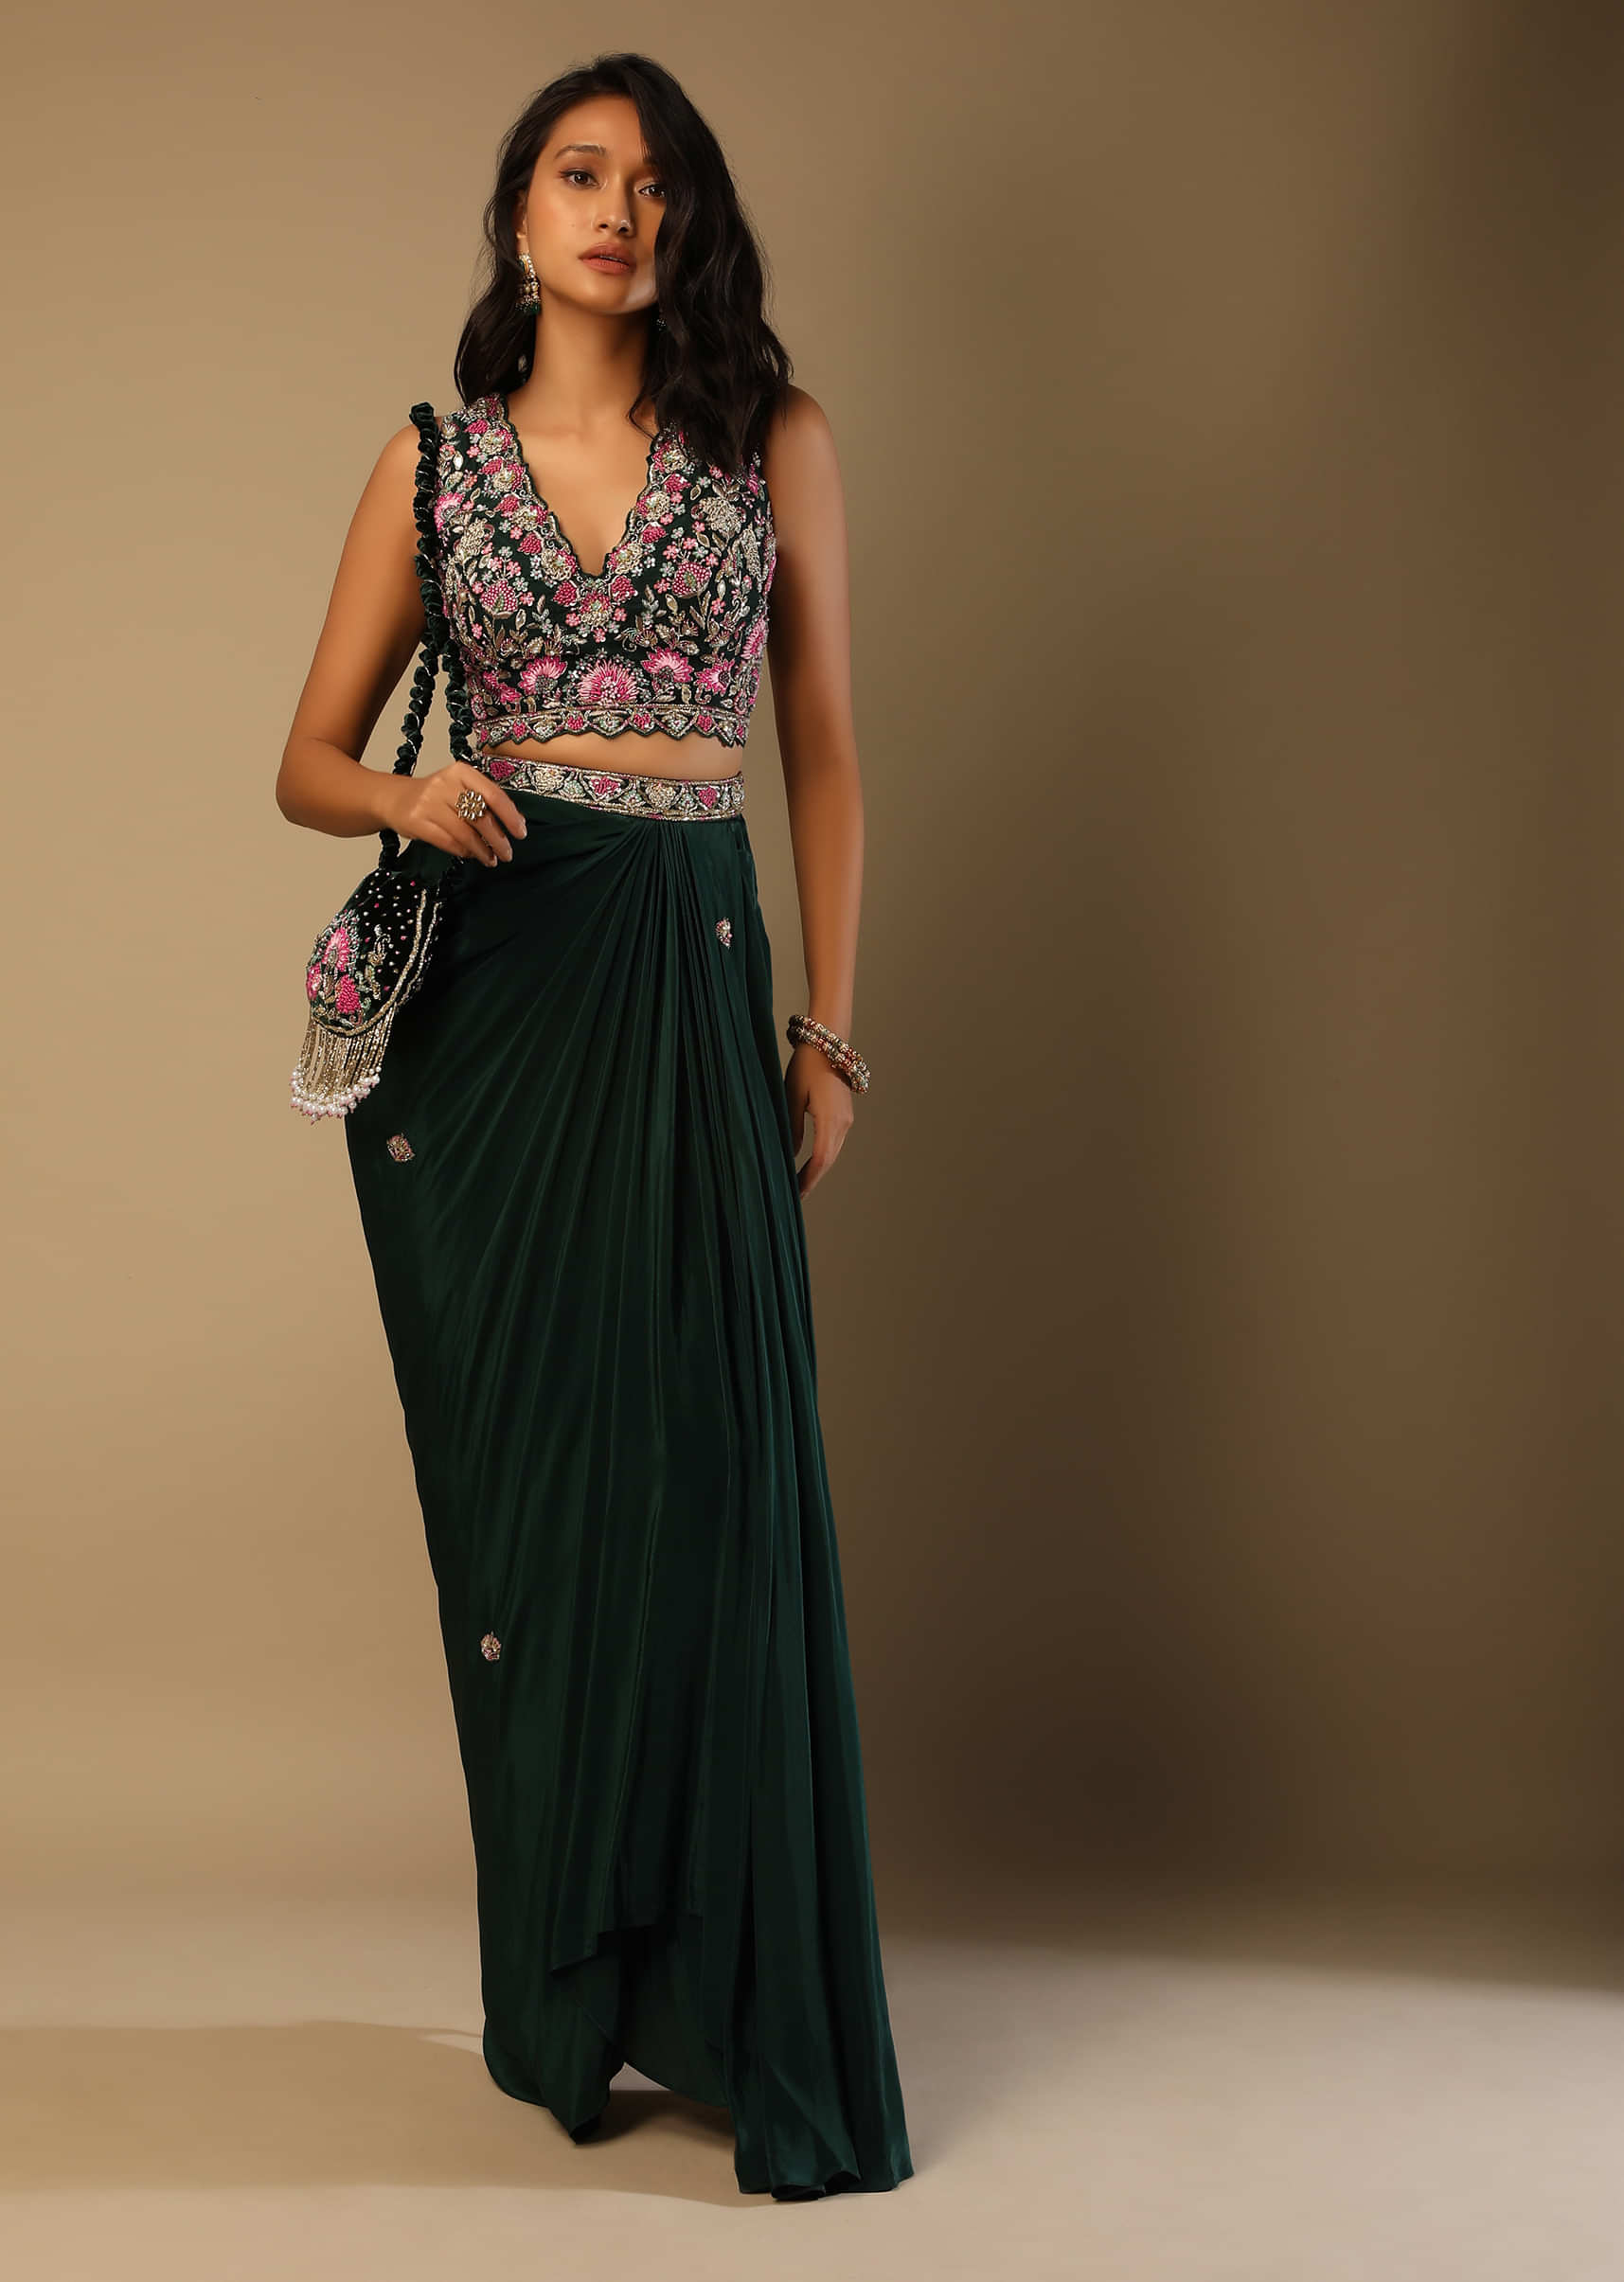 Bottle Green Dhoti Skirt And Choli With Multi Colored Hand Embroidery In Floral Motifs  